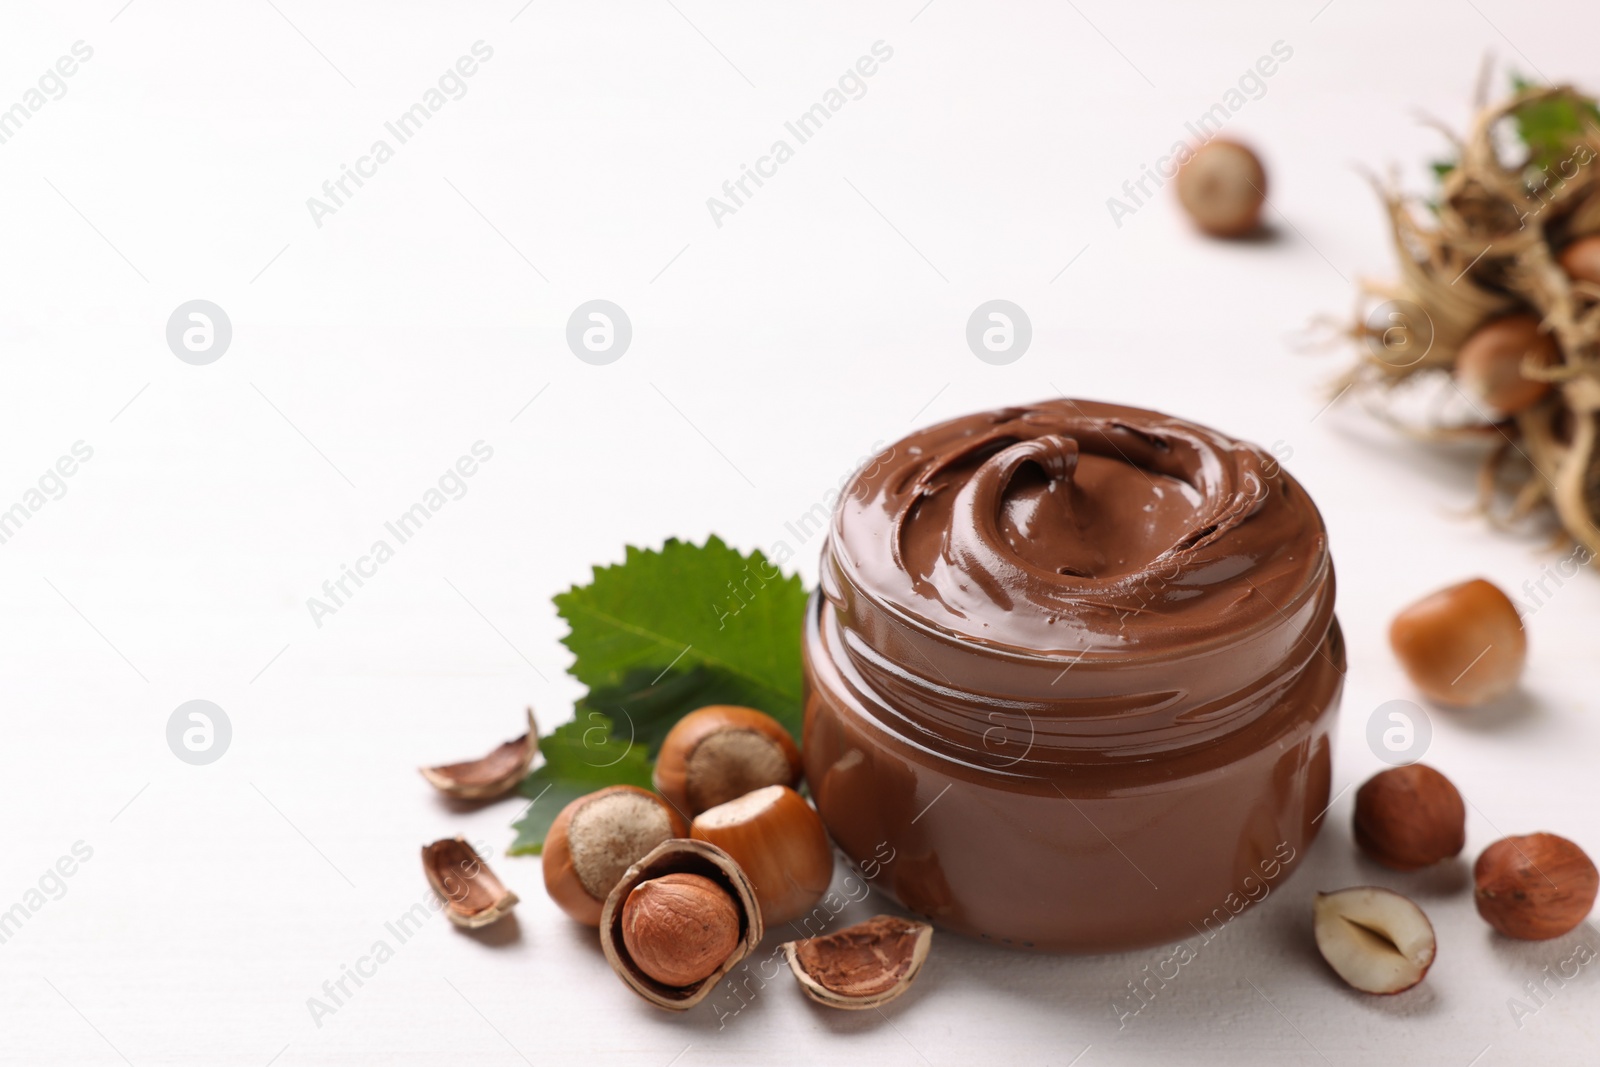 Photo of Glass jar with tasty chocolate spread, hazelnuts and green leaves on light background